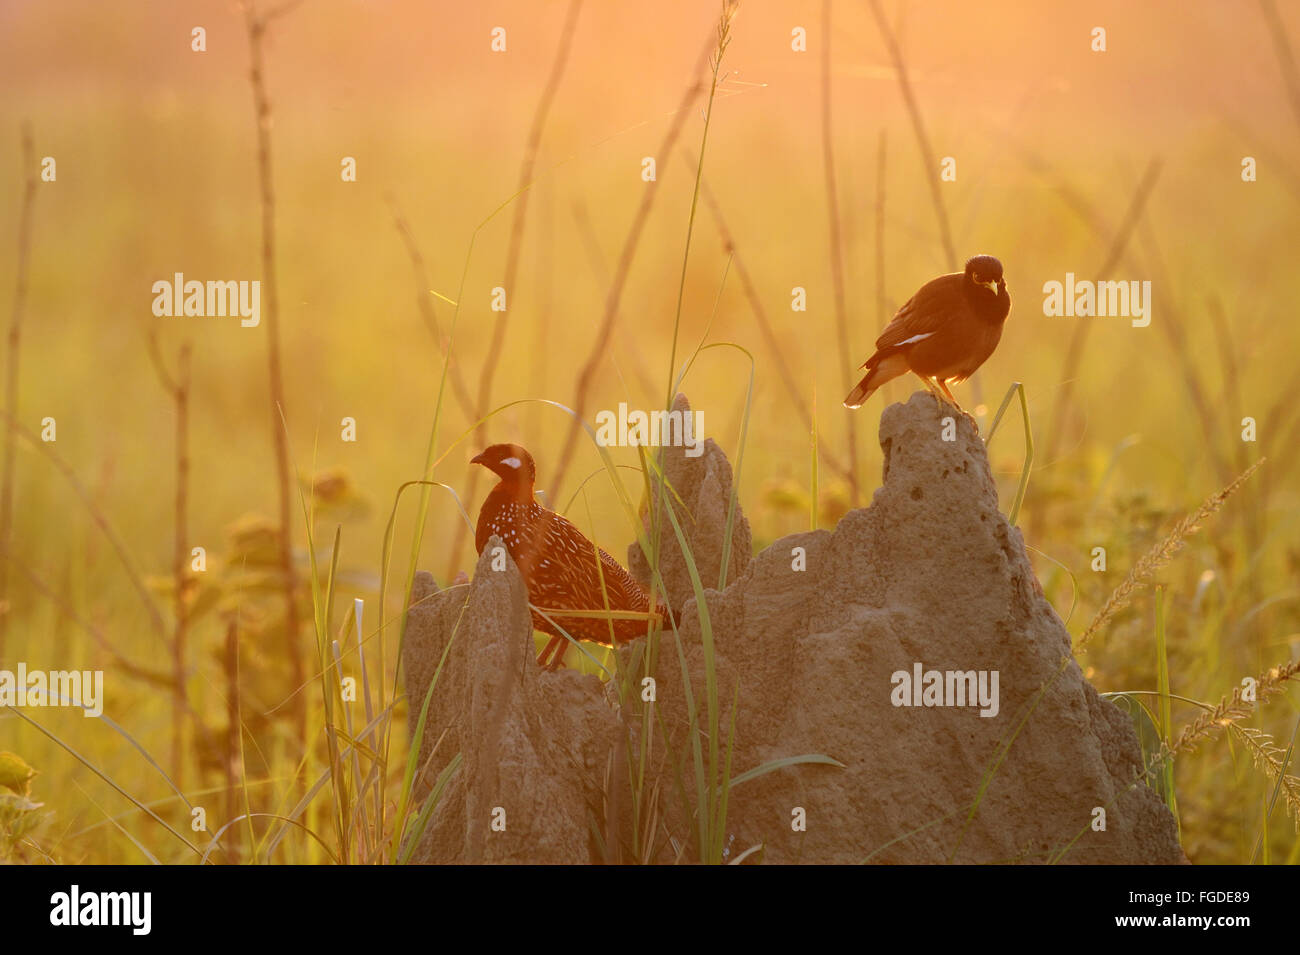 Black Francolin (Francolinus francolinus) adult male, and Common Mynah (Acridotheres tristis) adult, perched on termite mound at dawn, Jim Corbett N.P., Uttarkhand, India, May Stock Photo